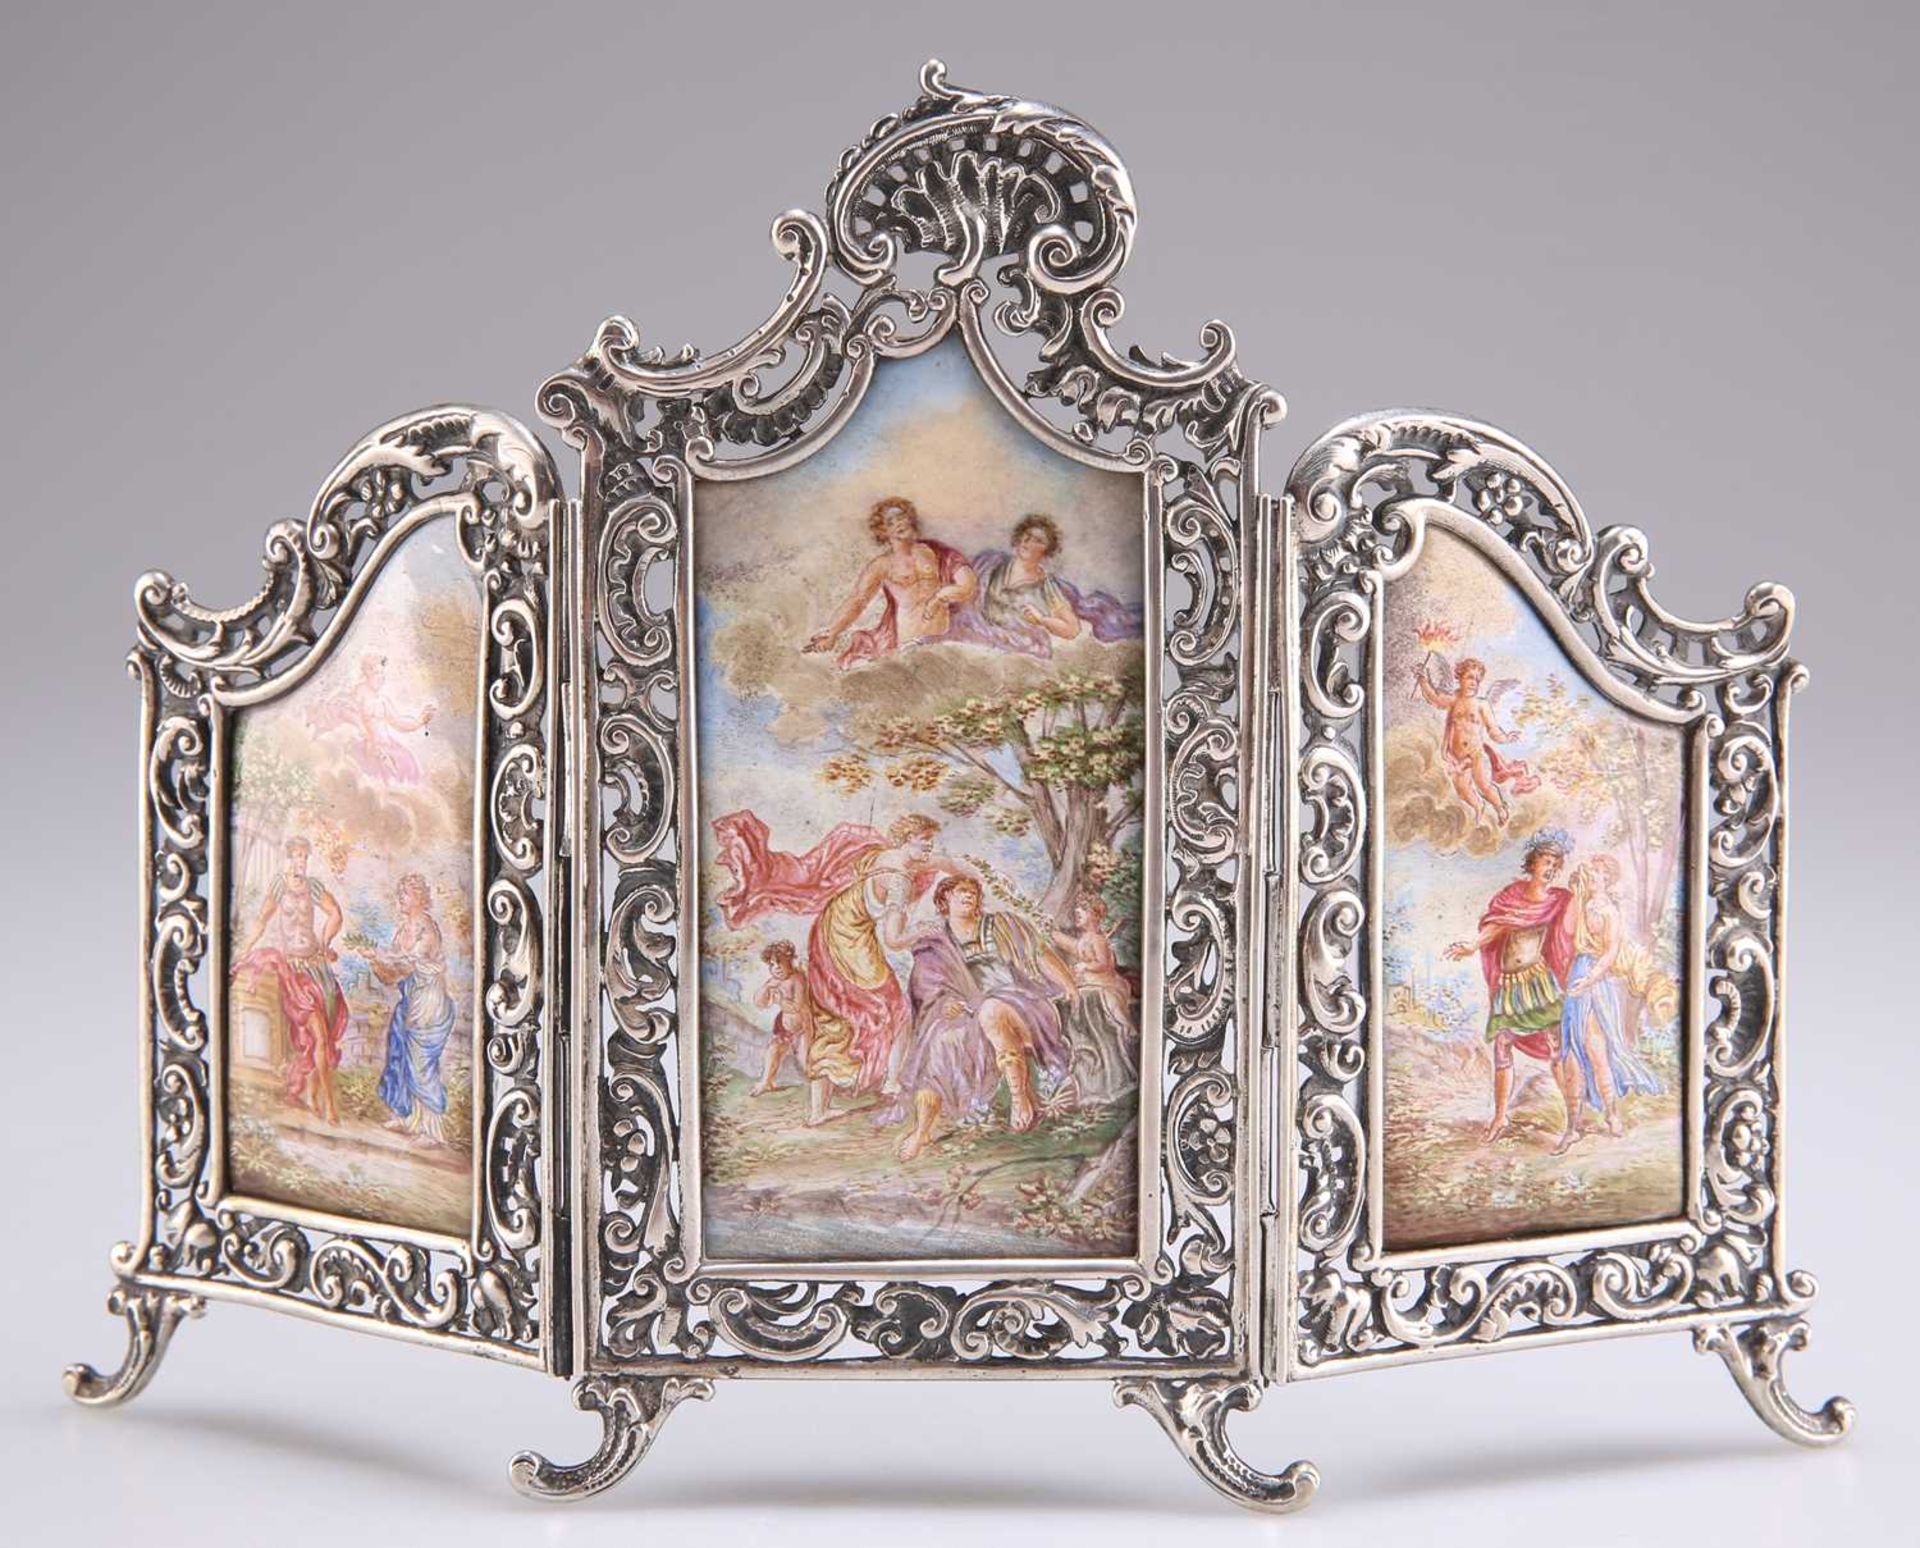 A VIENNESE SILVER AND ENAMEL SMALL TRIPTYCH TABLE-SCREEN